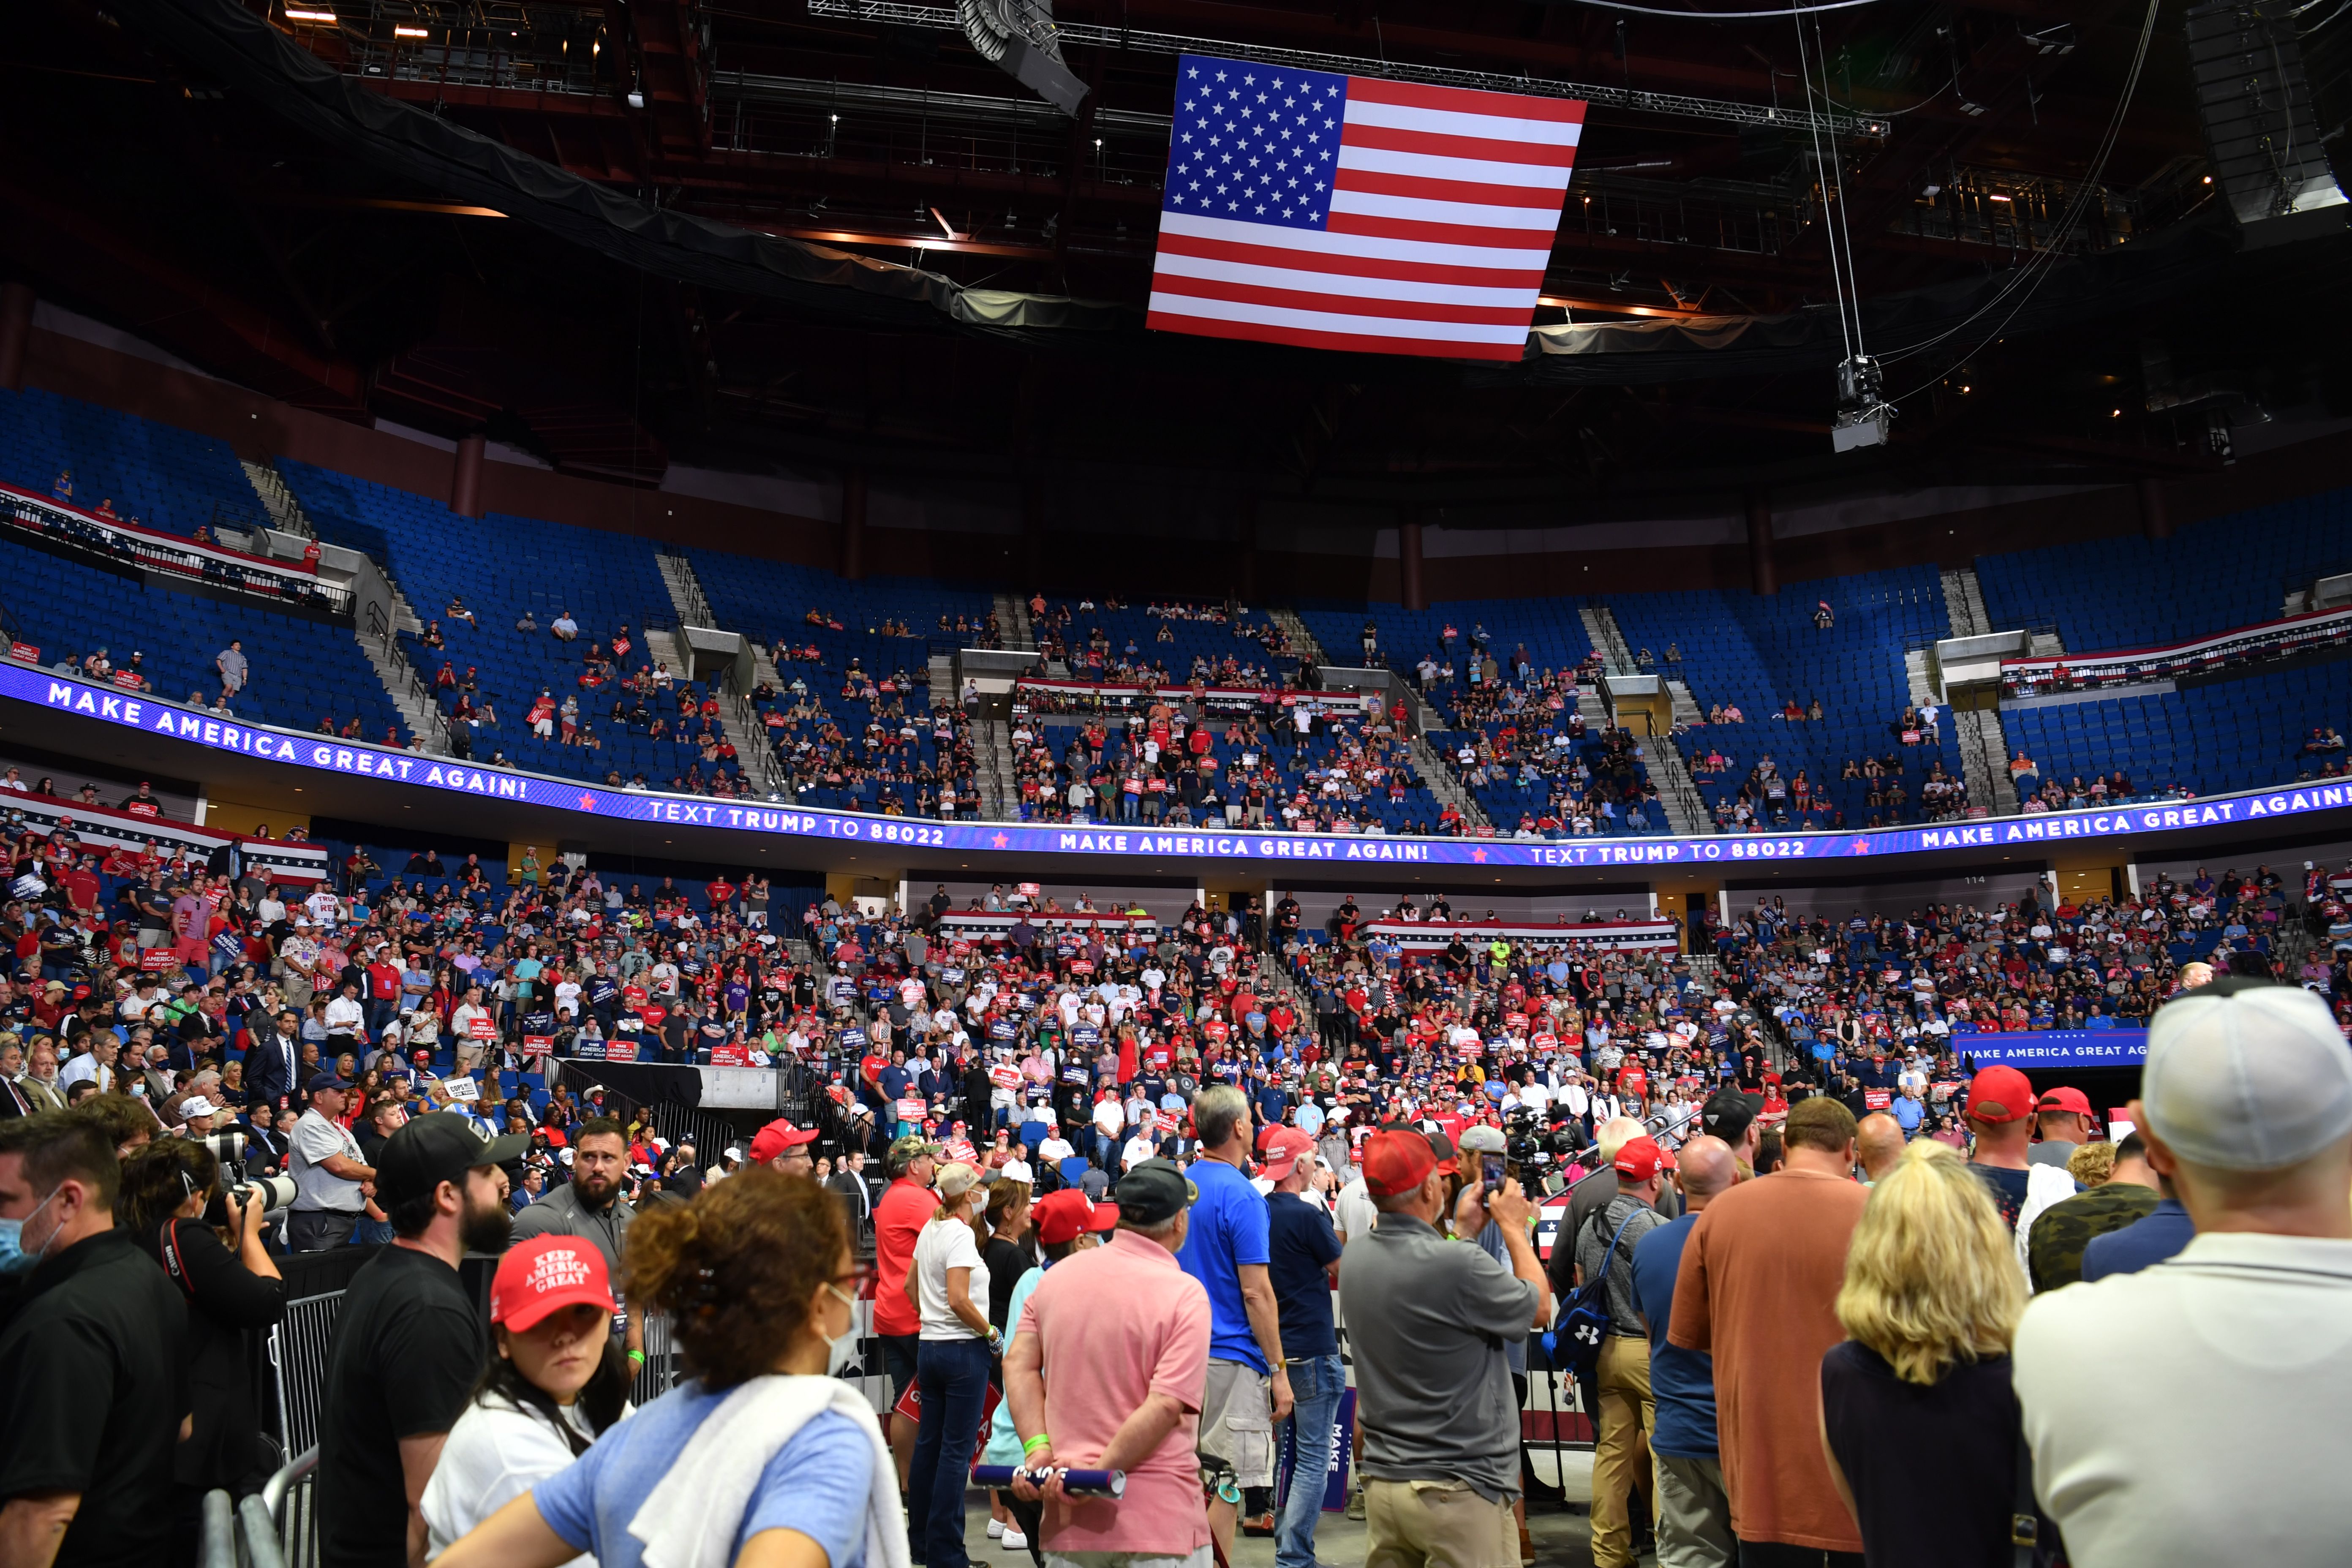 The upper section of the arena is seen partially empty as US President Donald Trump speaks during a campaign rally at the BOK Center on June 20, 2020 in Tulsa, Oklahoma. (Photo: Nicholas Kamm/AFP via Getty Images)